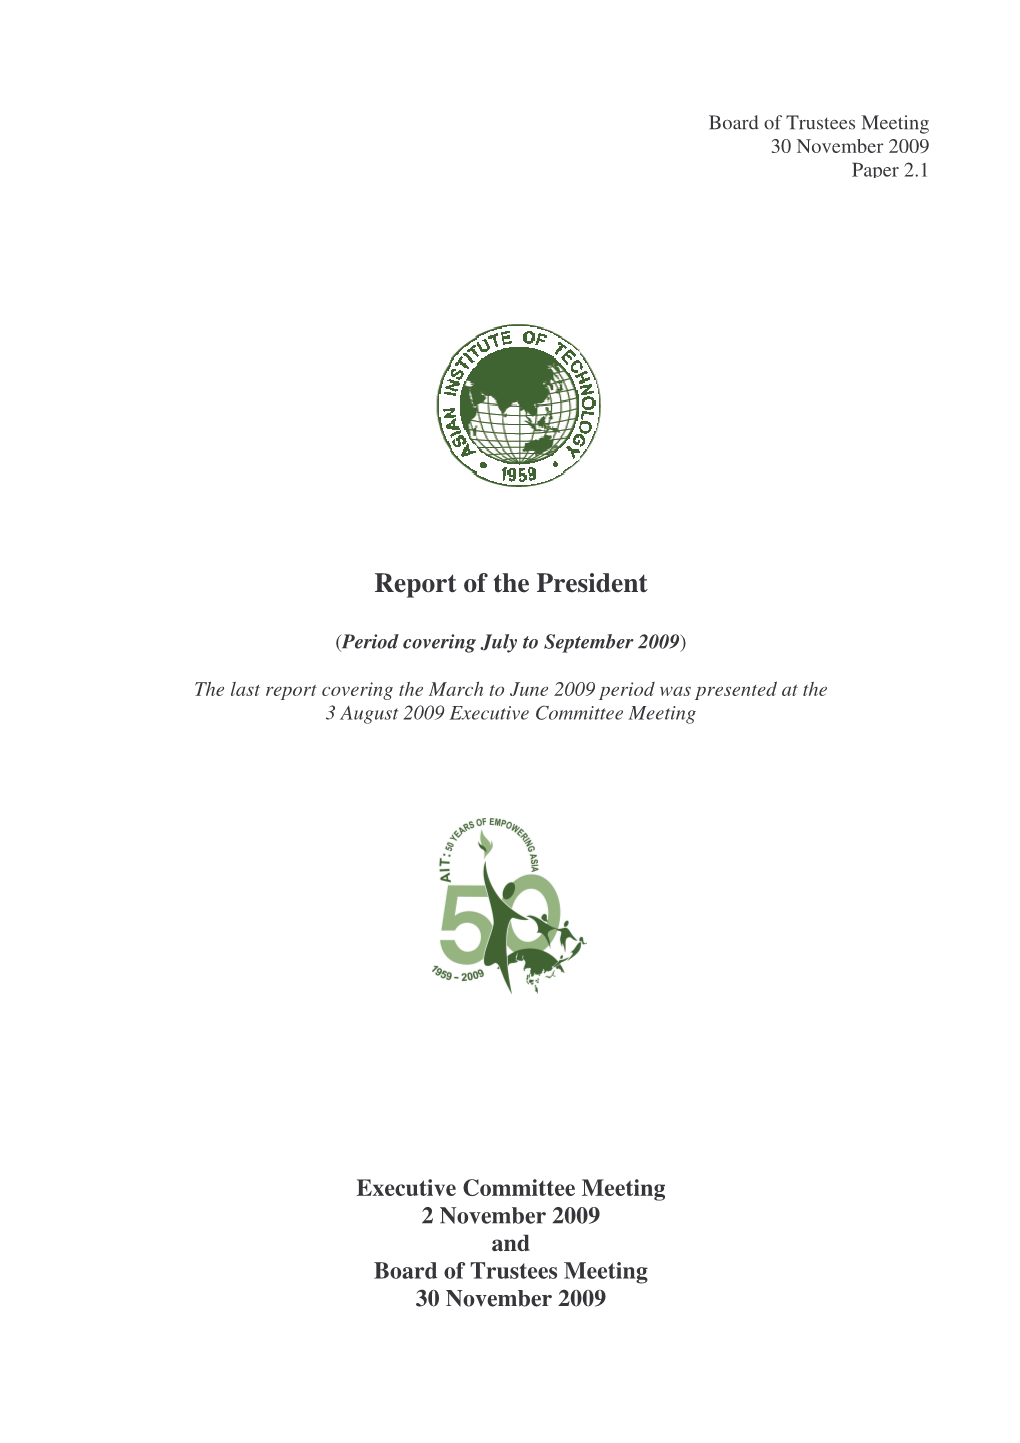 Paper 2.1 Report of AIT President